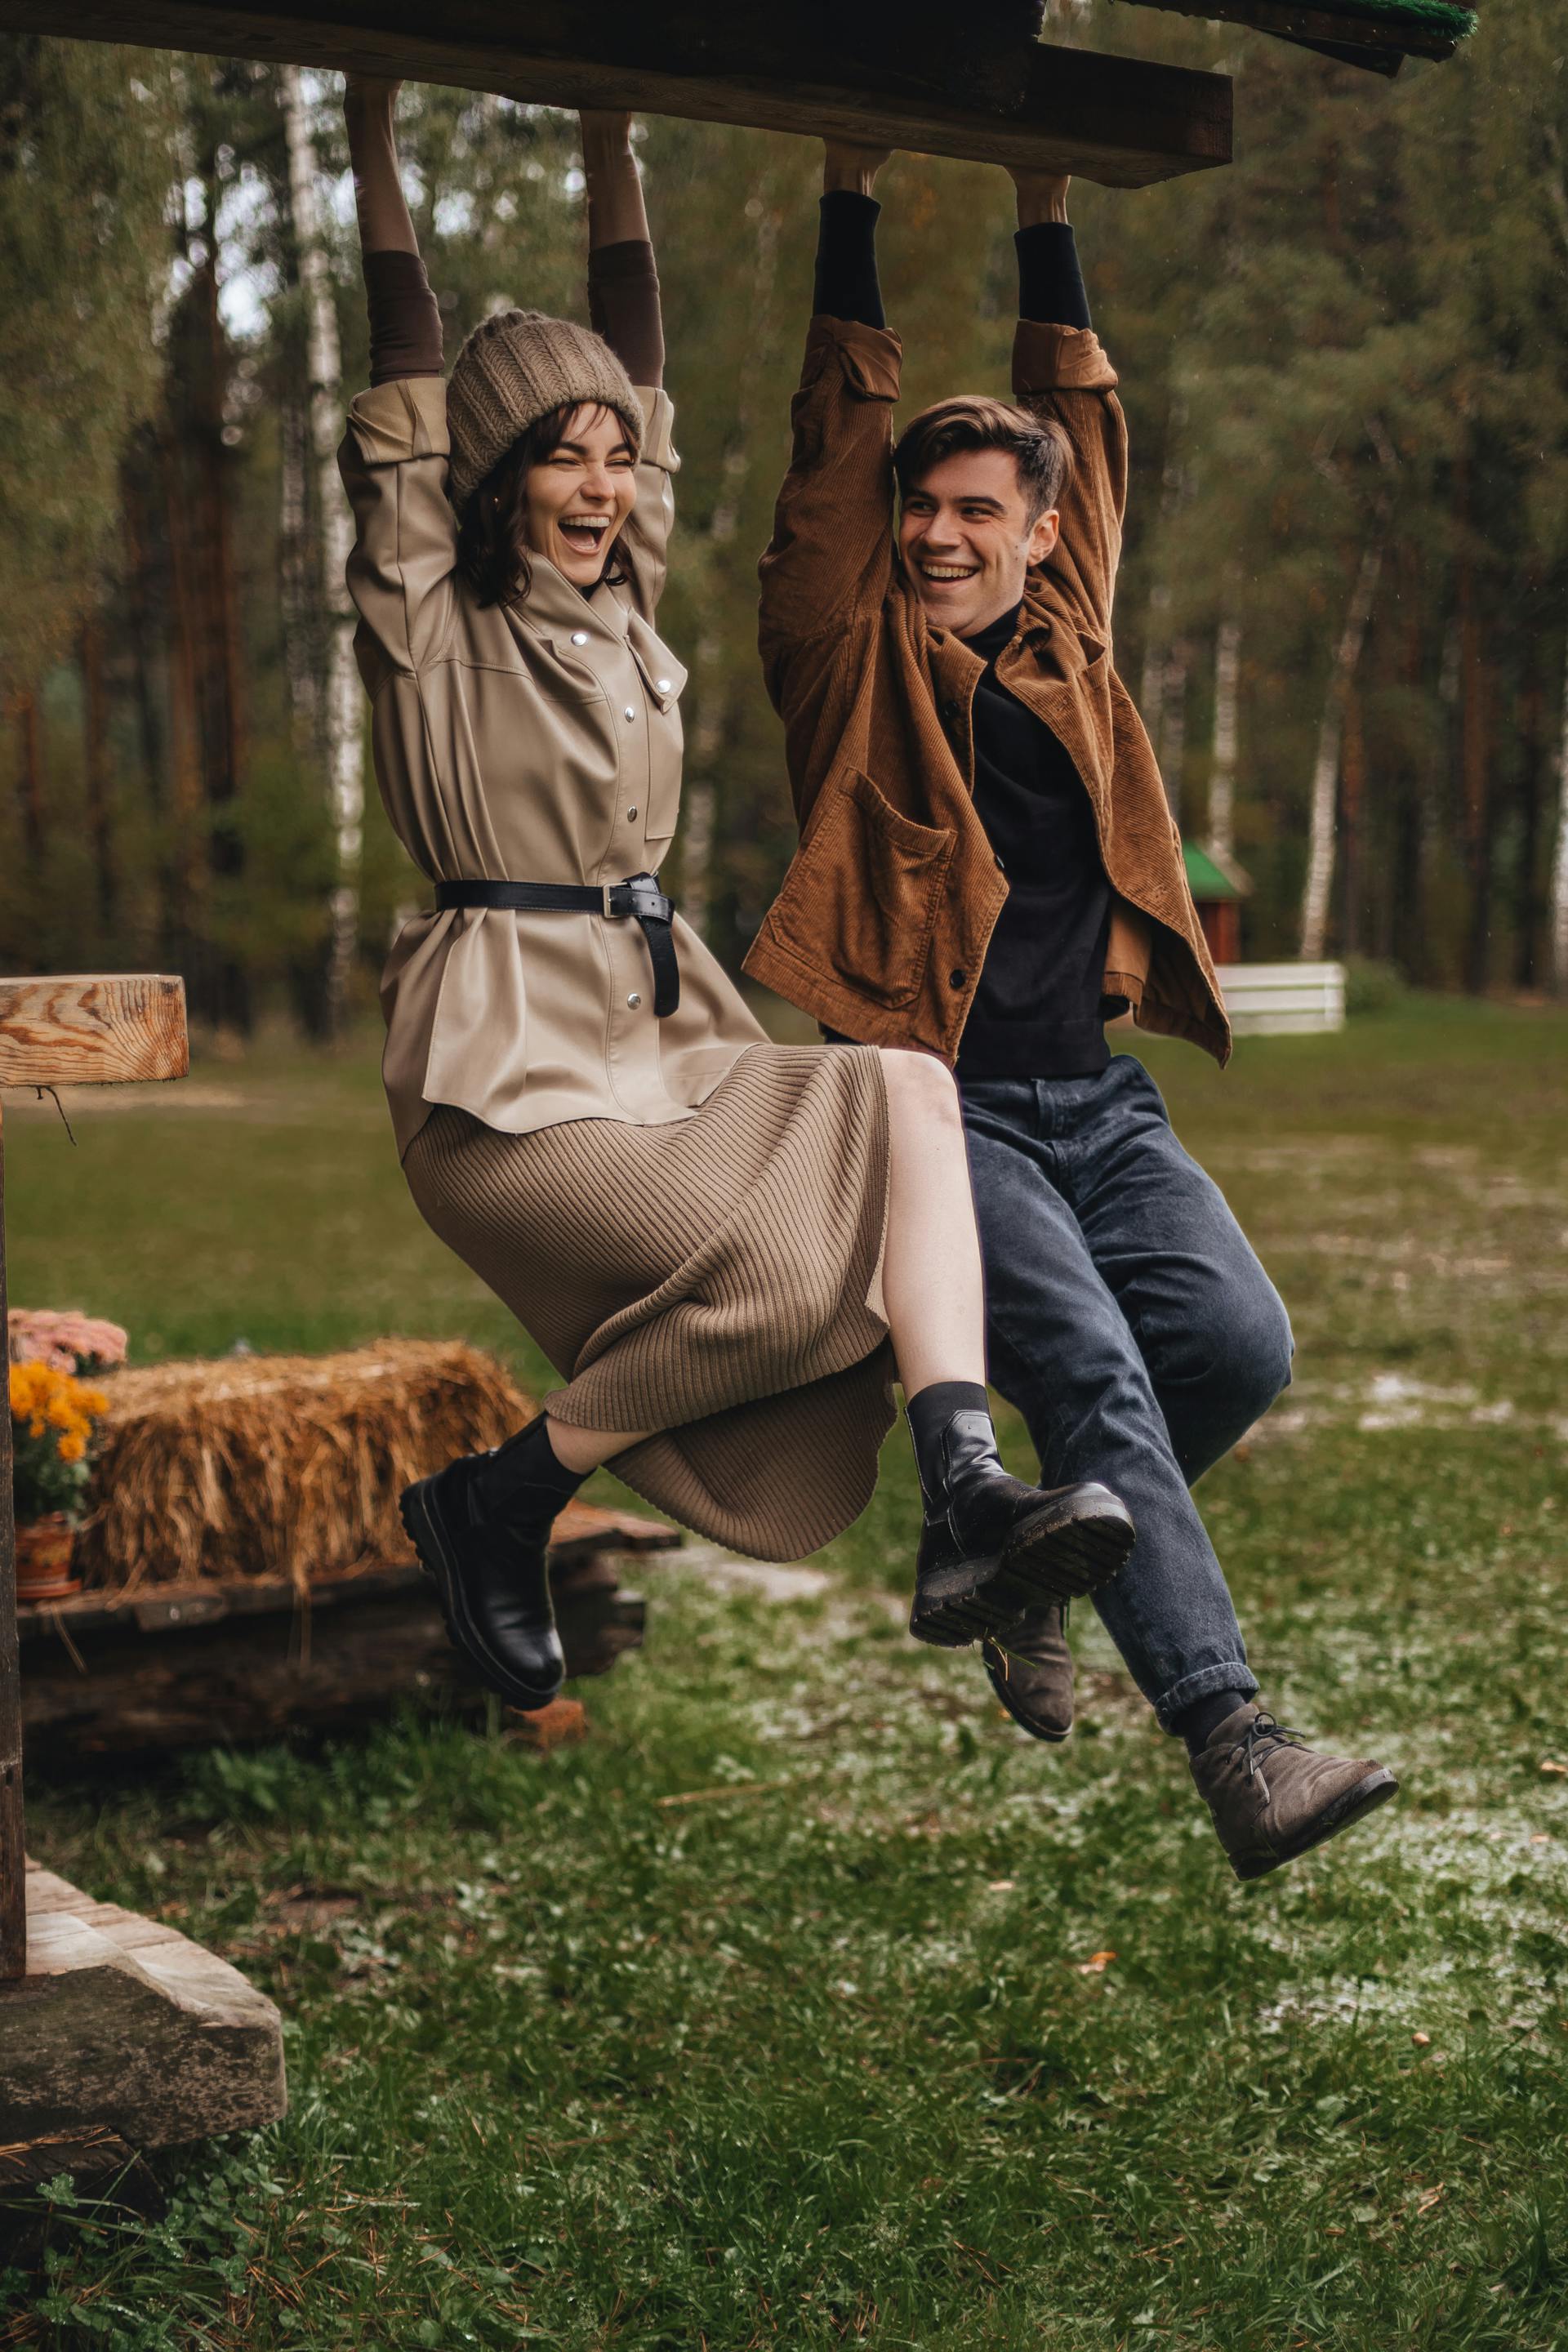 A man and woman hanging from a roof | Source: Pexels